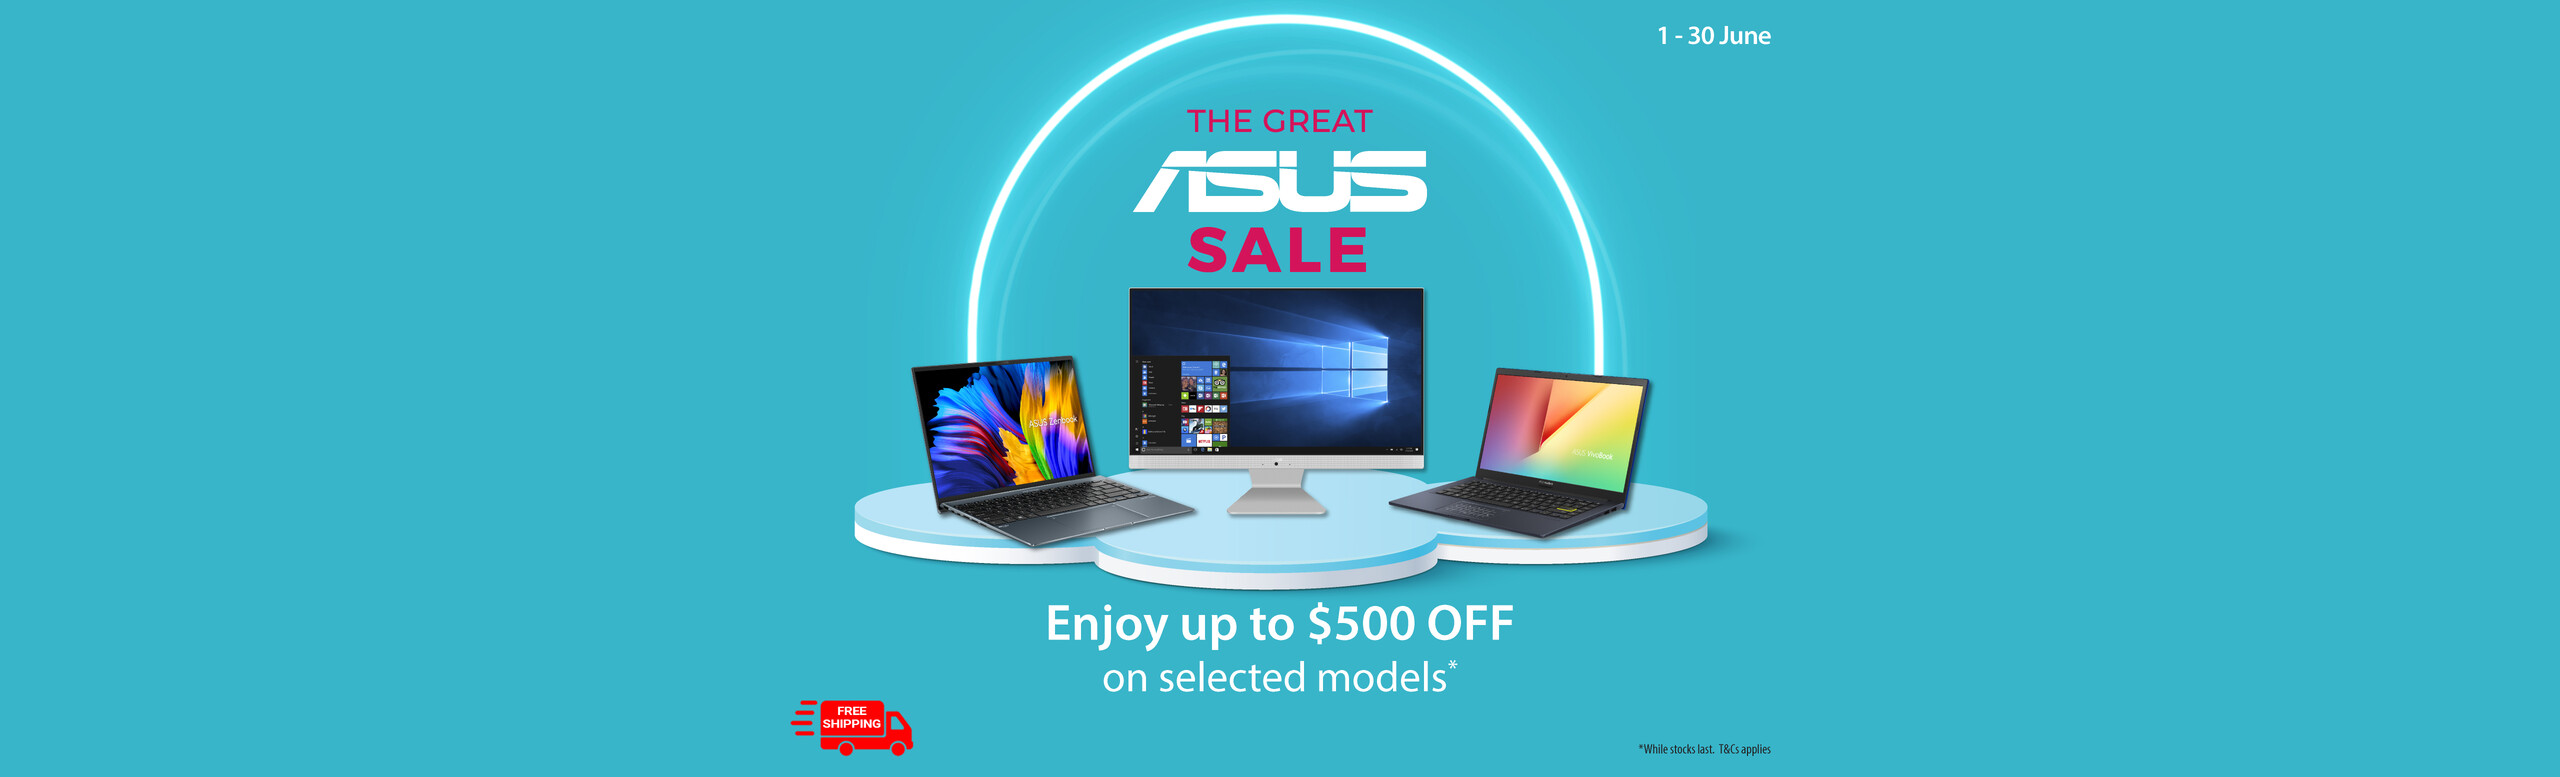 The Great ASUS Sale